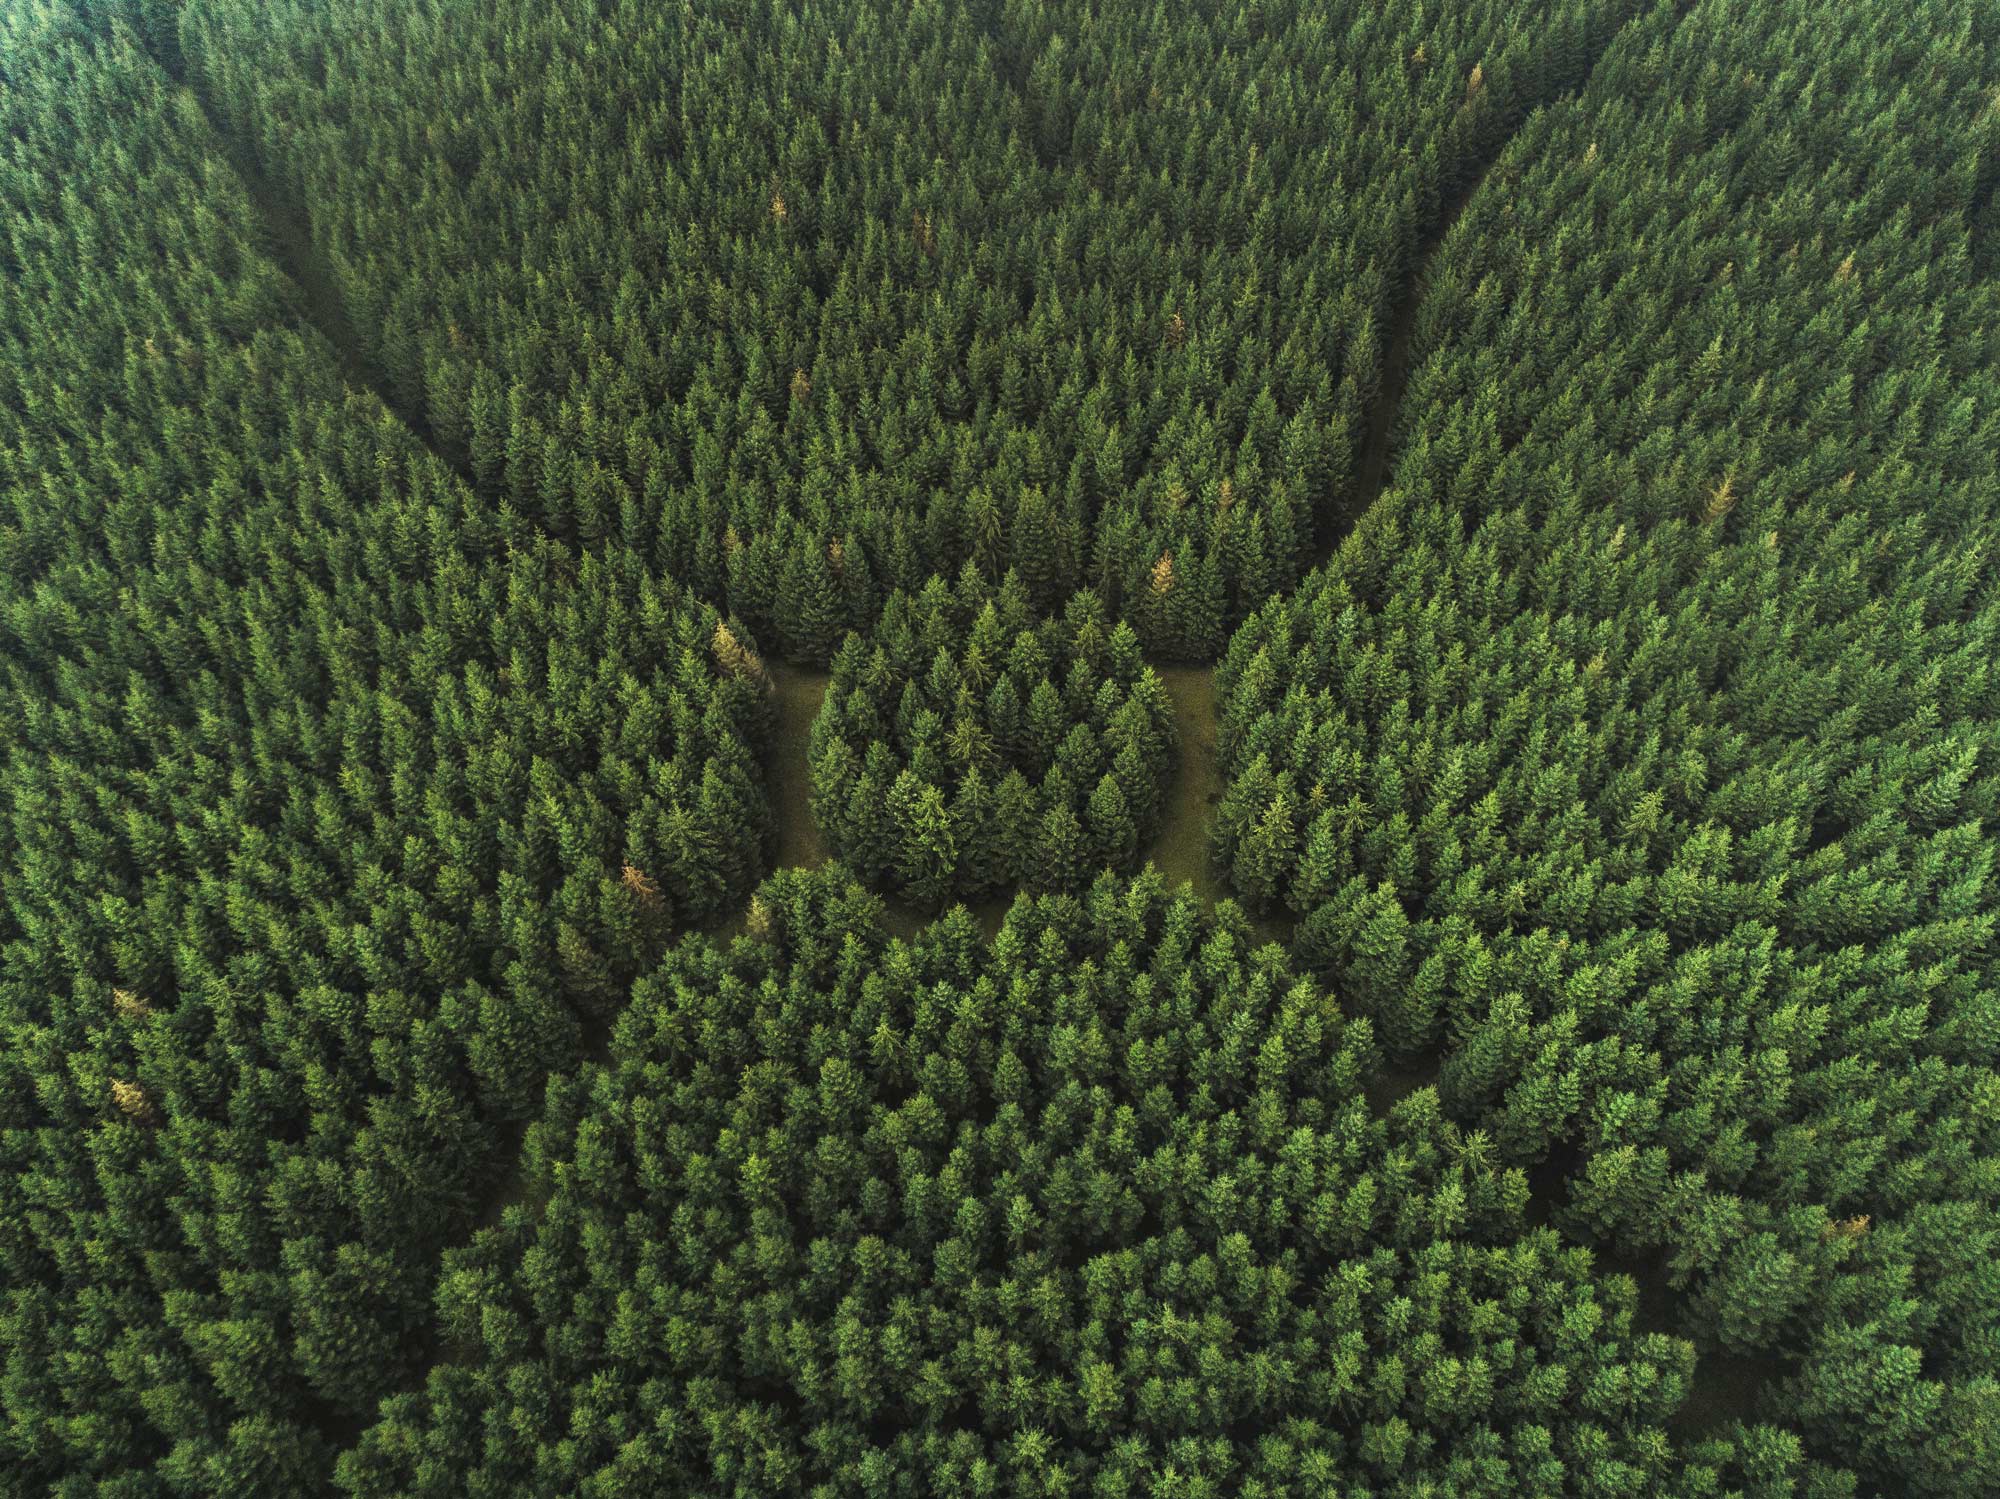 A forest seen from above.